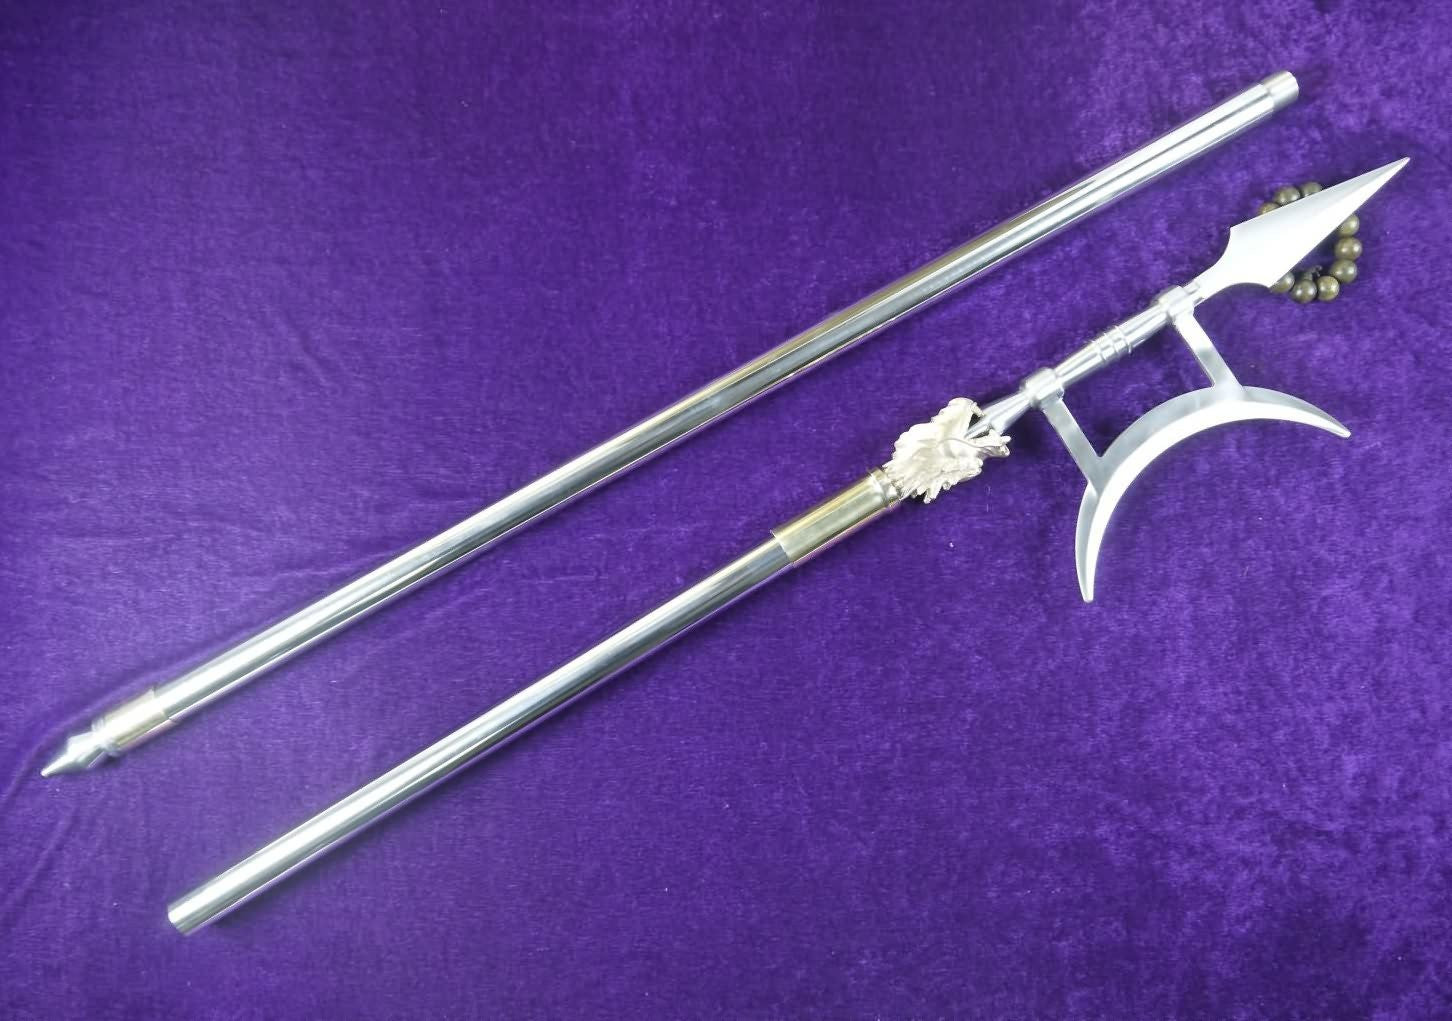 Halberd/Stainless steel hand-made/Chinese martial arts/Kung fu - Chinese sword shop